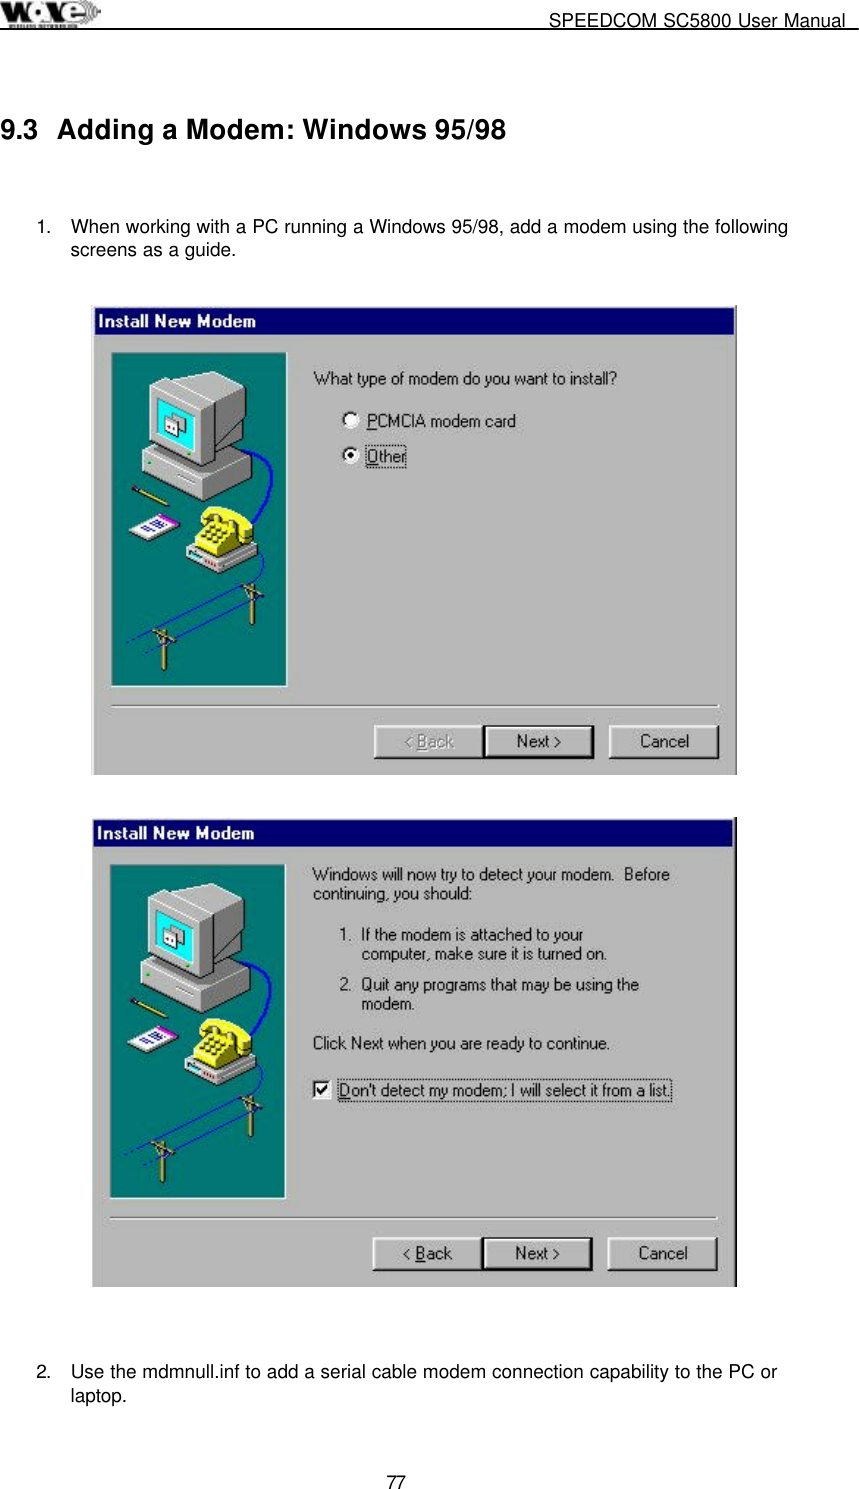     SPEEDCOM SC5800 User Manual  77 9.3  Adding a Modem: Windows 95/98  1.  When working with a PC running a Windows 95/98, add a modem using the following screens as a guide.       2.  Use the mdmnull.inf to add a serial cable modem connection capability to the PC or laptop. 